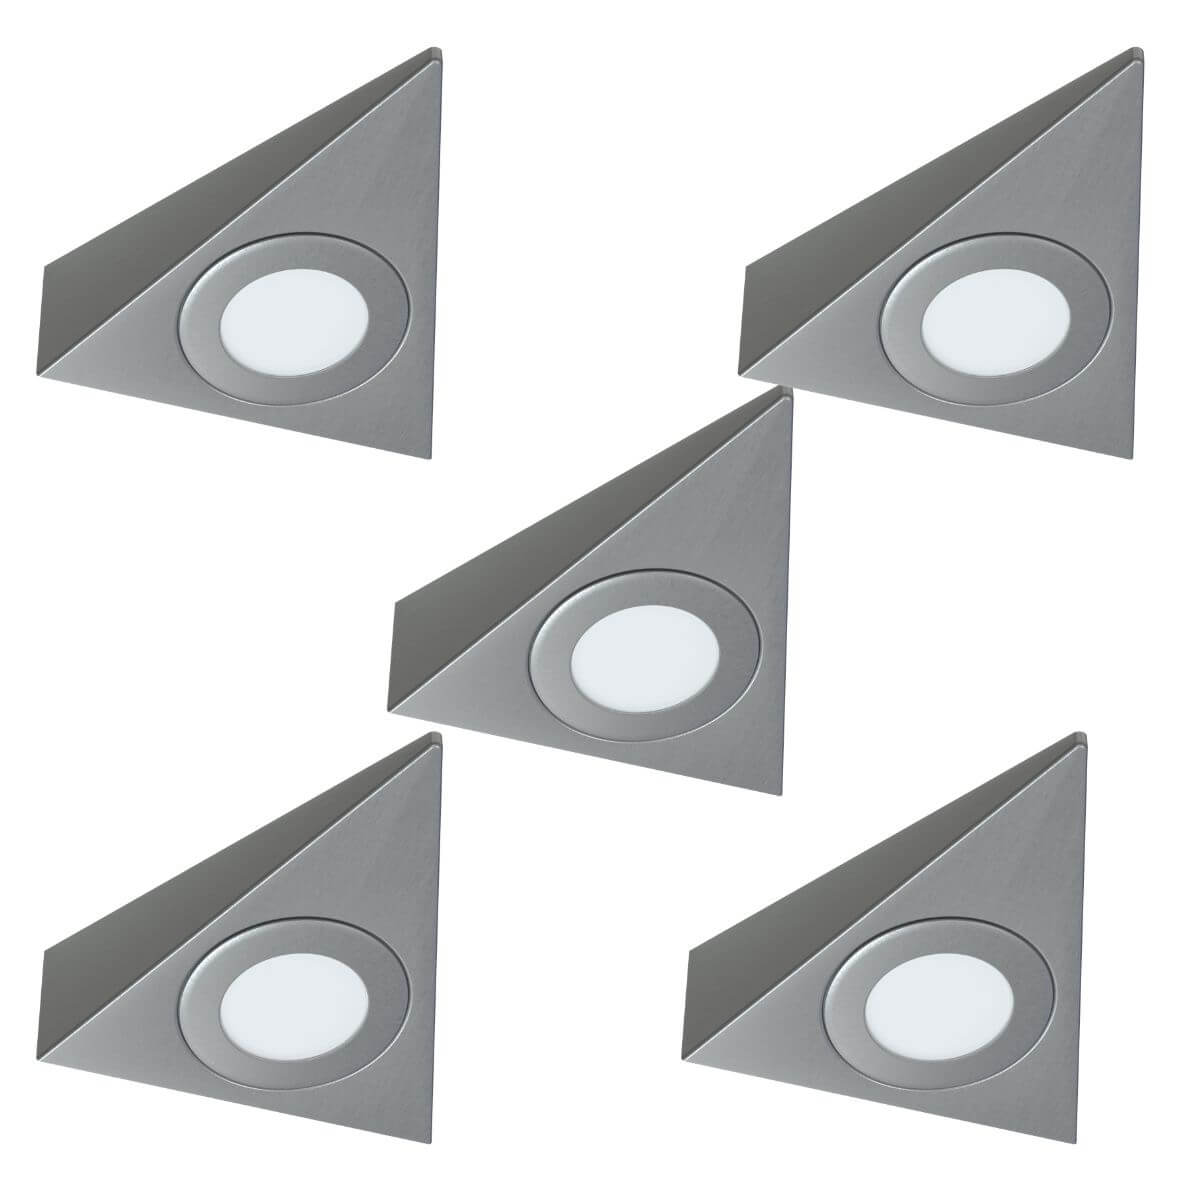 View 5 Pack High Brightness Triangle LED Under Cabinet Lights With 15w Driver information